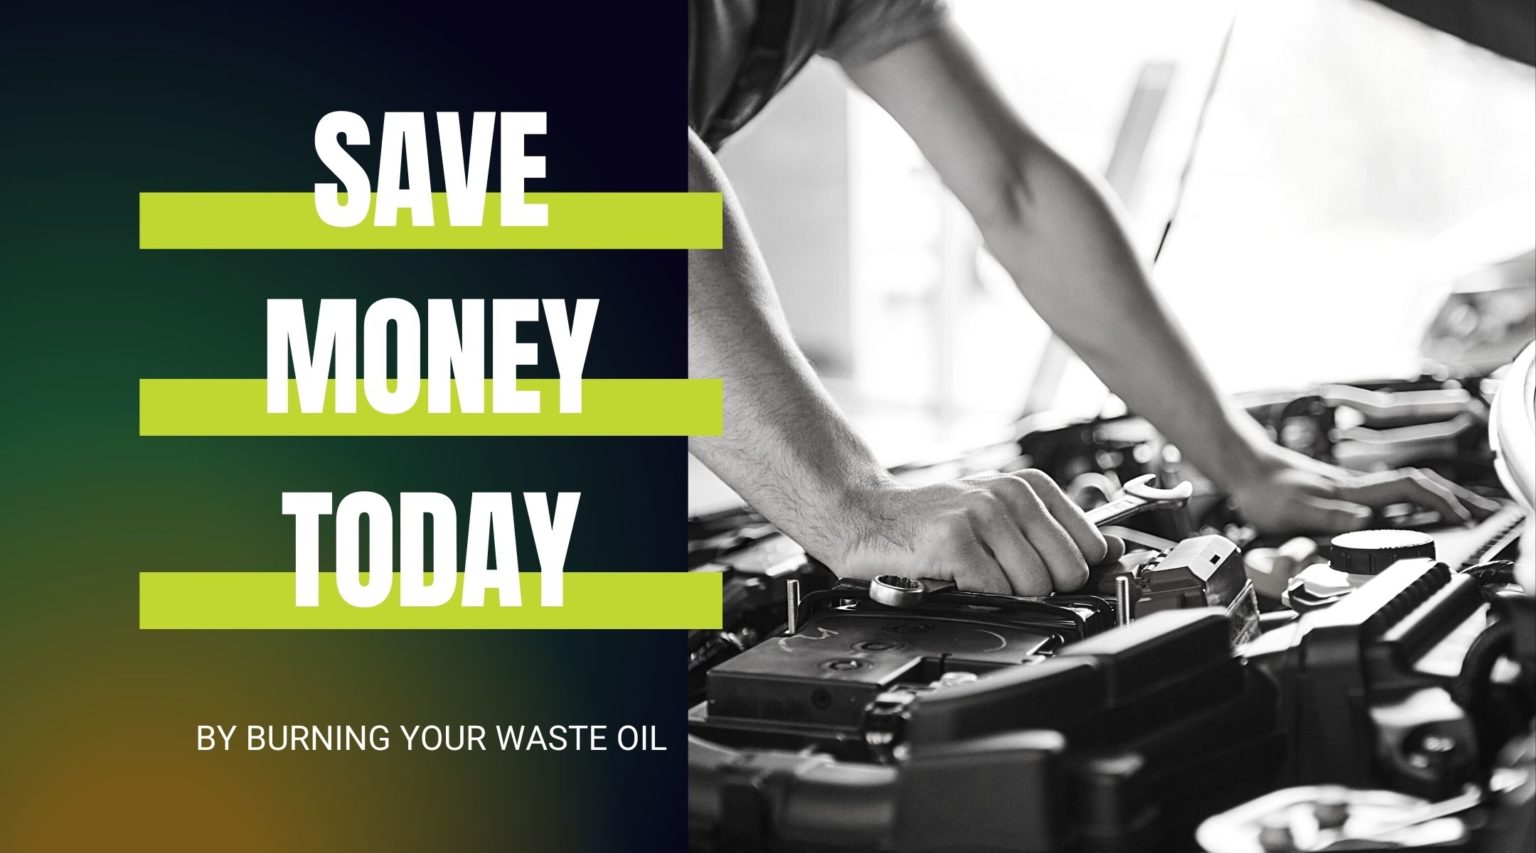 Save money today by Burning Your Waste Oil